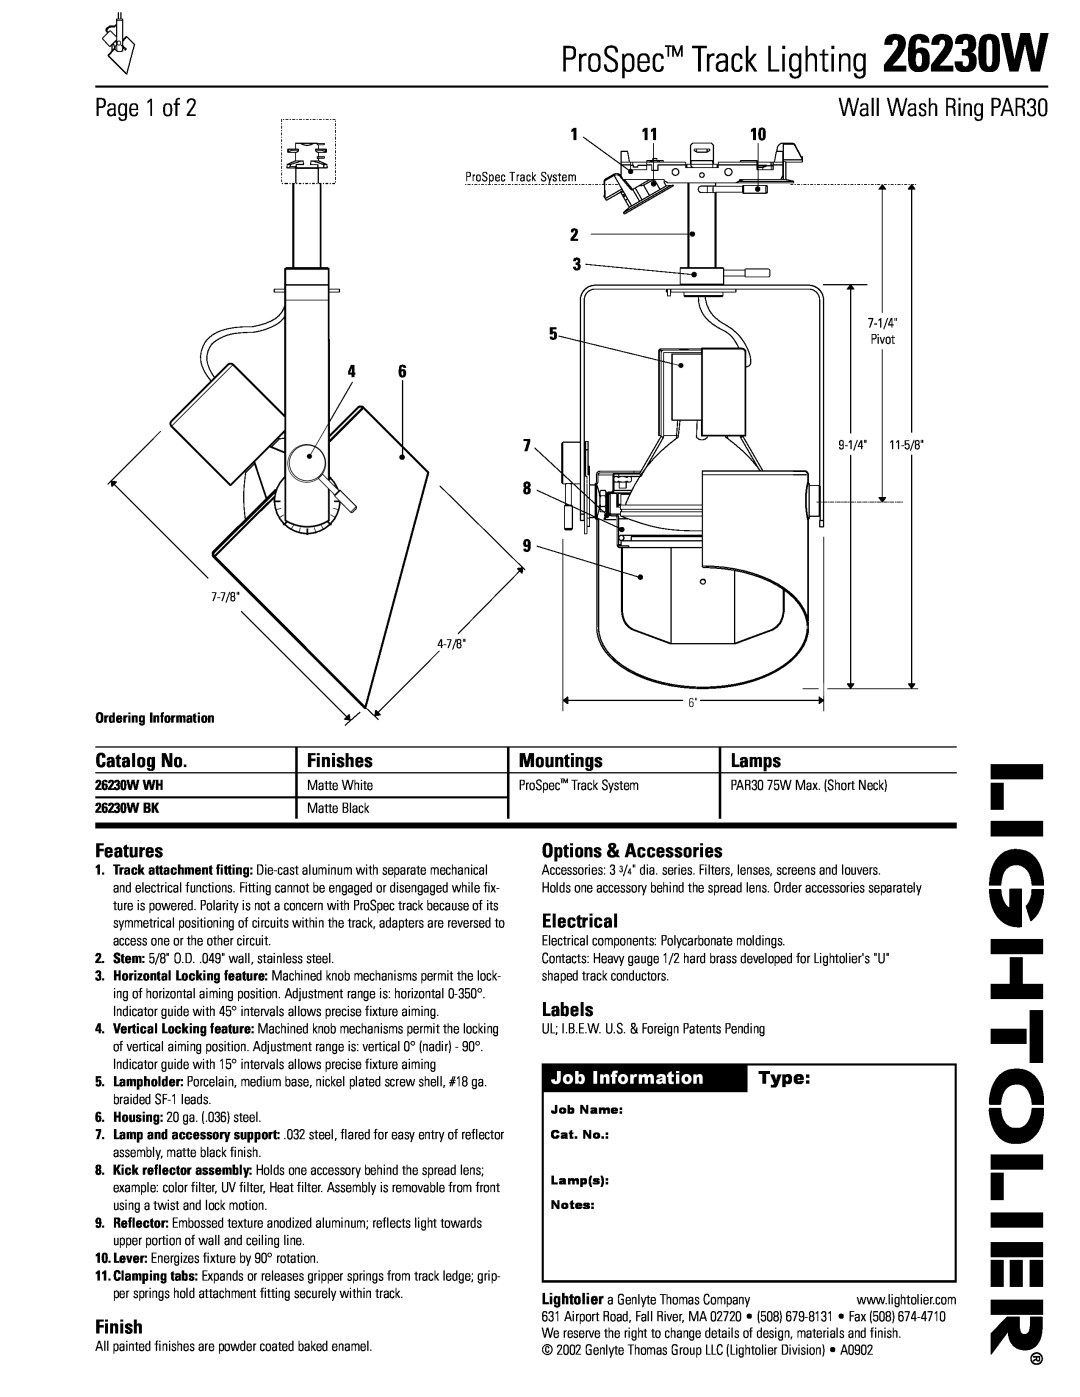 Lightolier manual Page 1 of, 2 3, Job Information, Type, Ordering Information, 26230W WH, 26230W BK, Catalog No, Lamps 